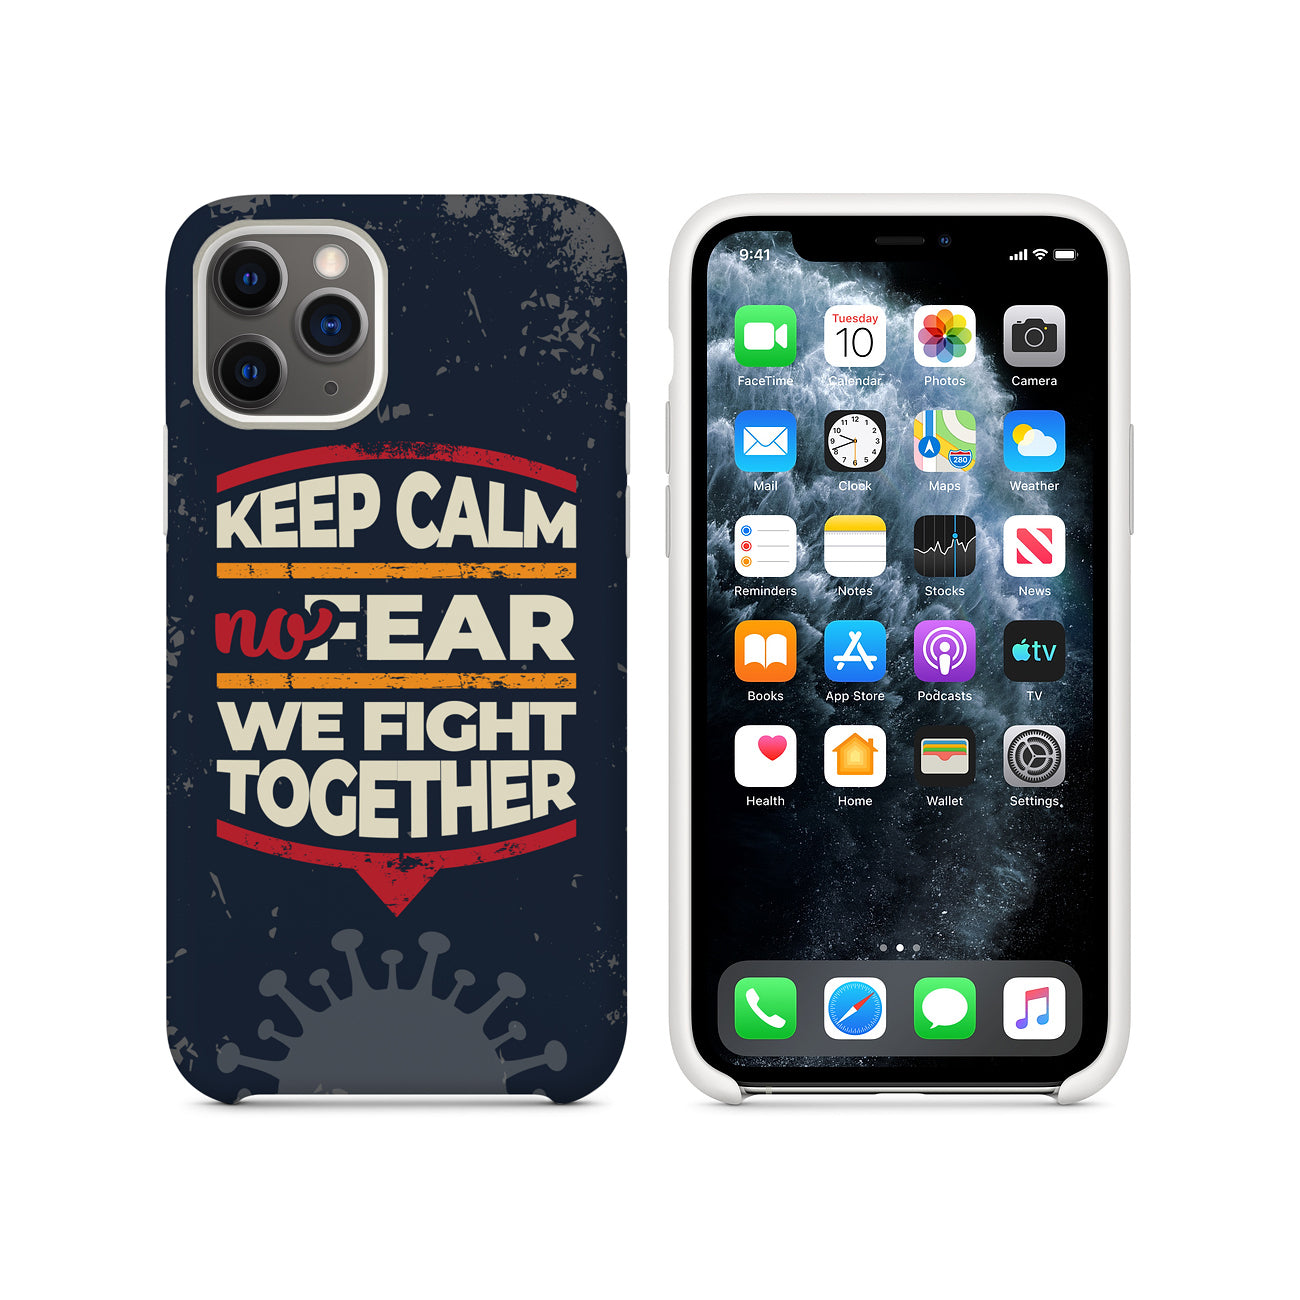 Eagle Design Case For APPLE IPHONE 11 In Mix